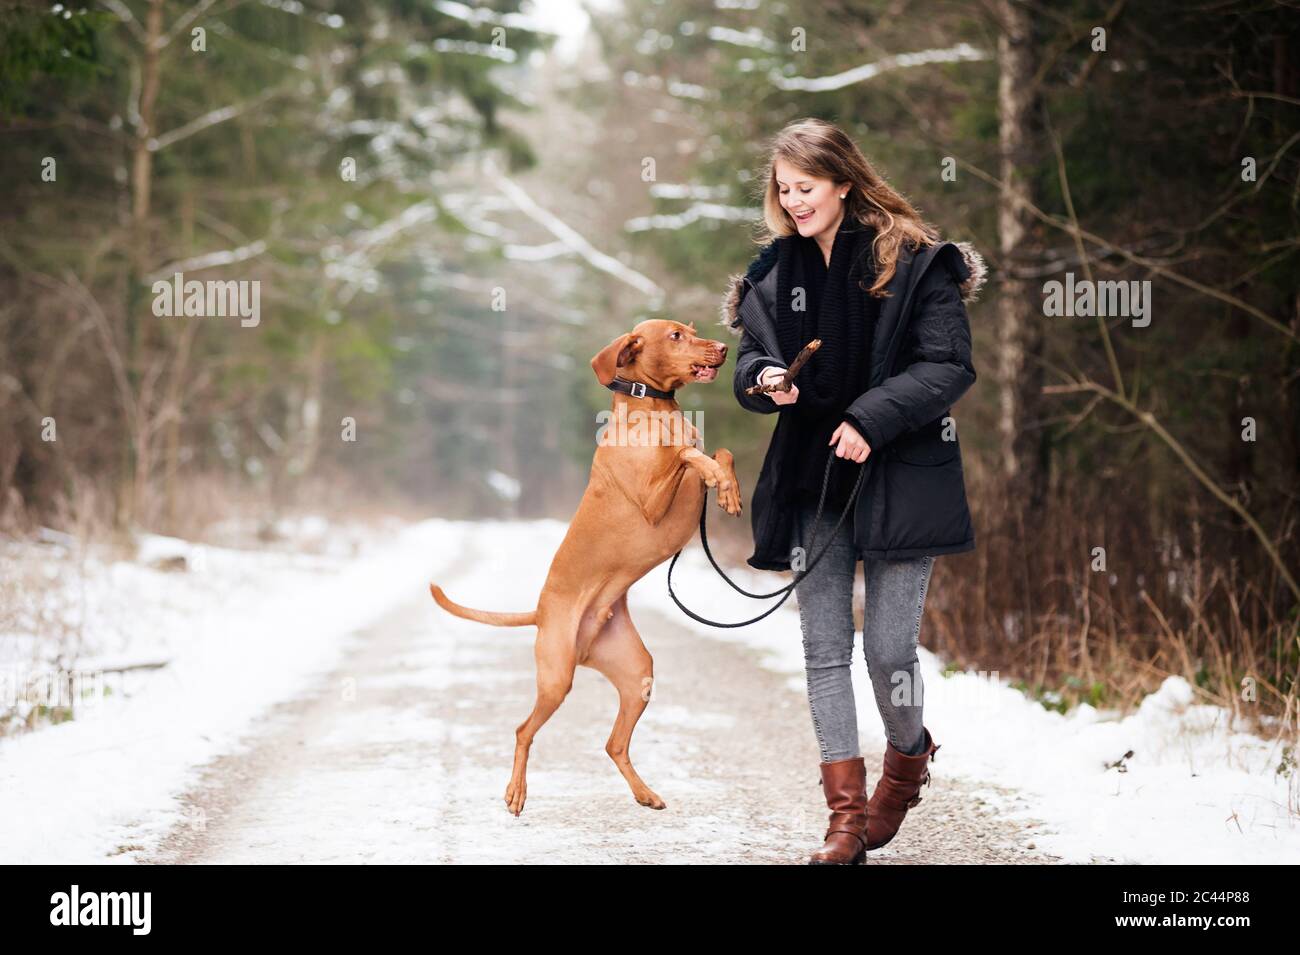 Happy young woman walking while playing with dog on road in forest Stock Photo